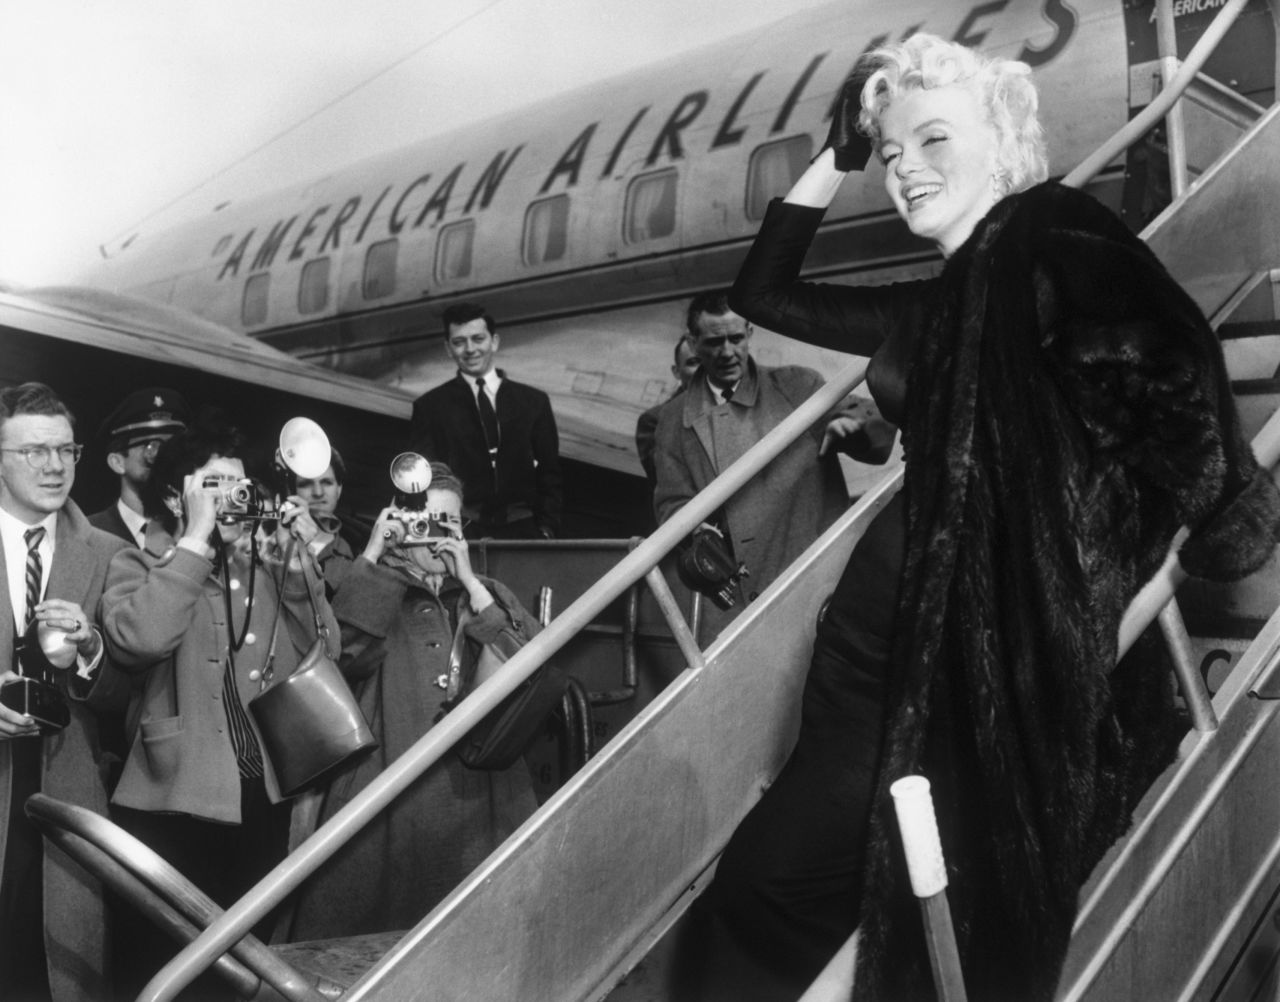 Marilyn Monroe poses at Idlewild as she boards an American Airlines plane for Hollywood in 1956.